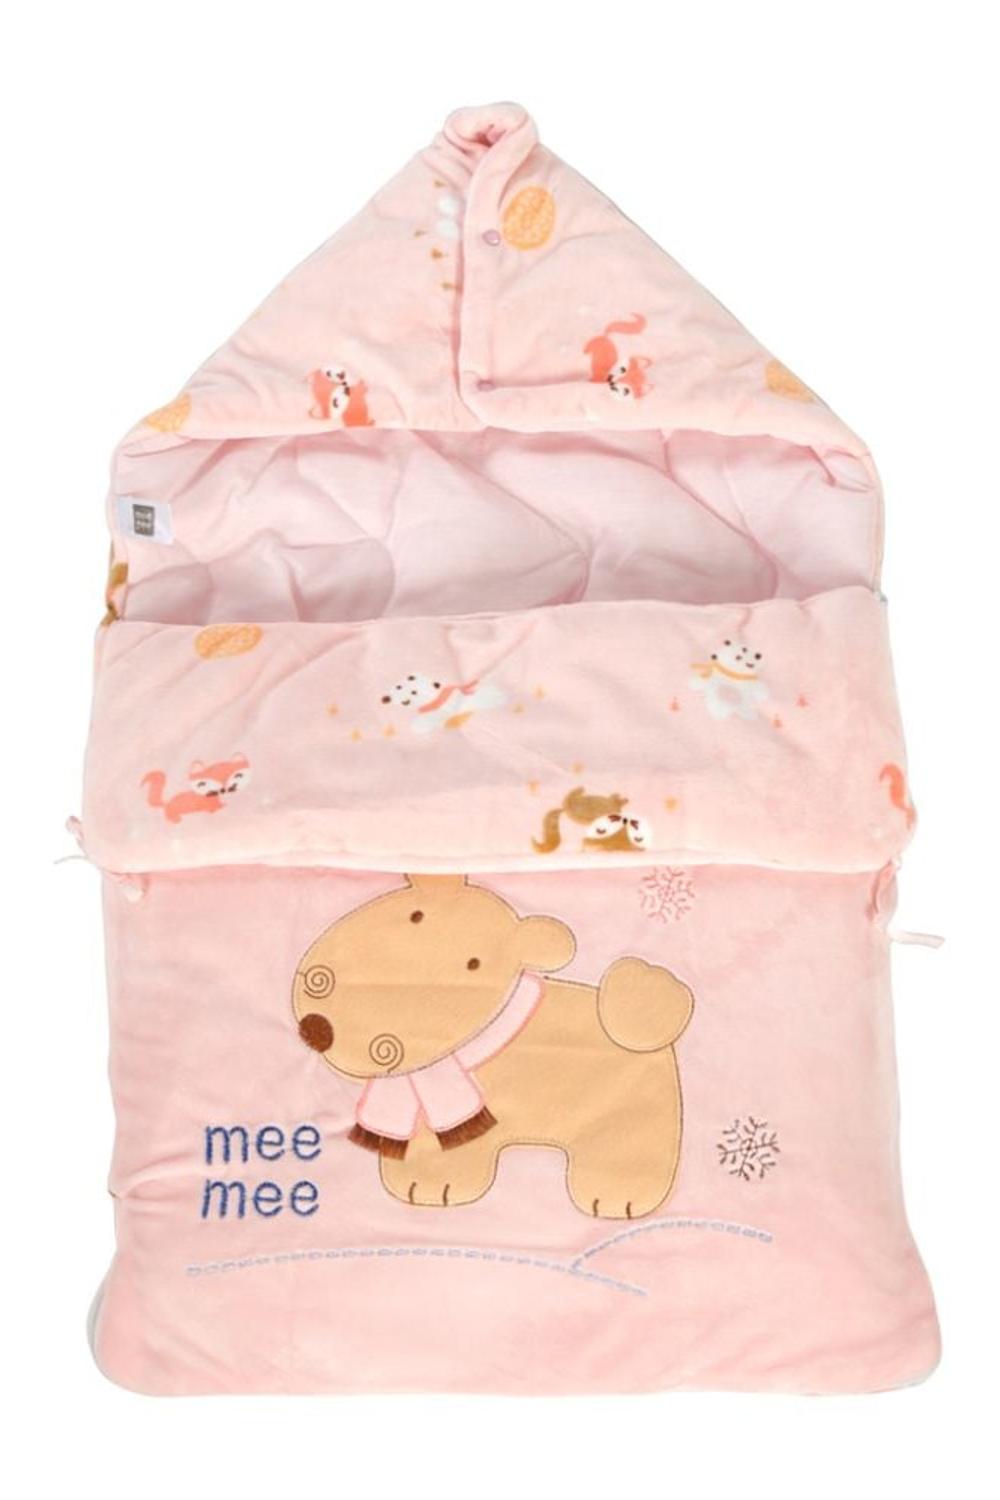 Mee Mee 3 in 1 Baby Carry Nest with Sleeping Bag and Mattress for Babies (Pink Puppy Print)